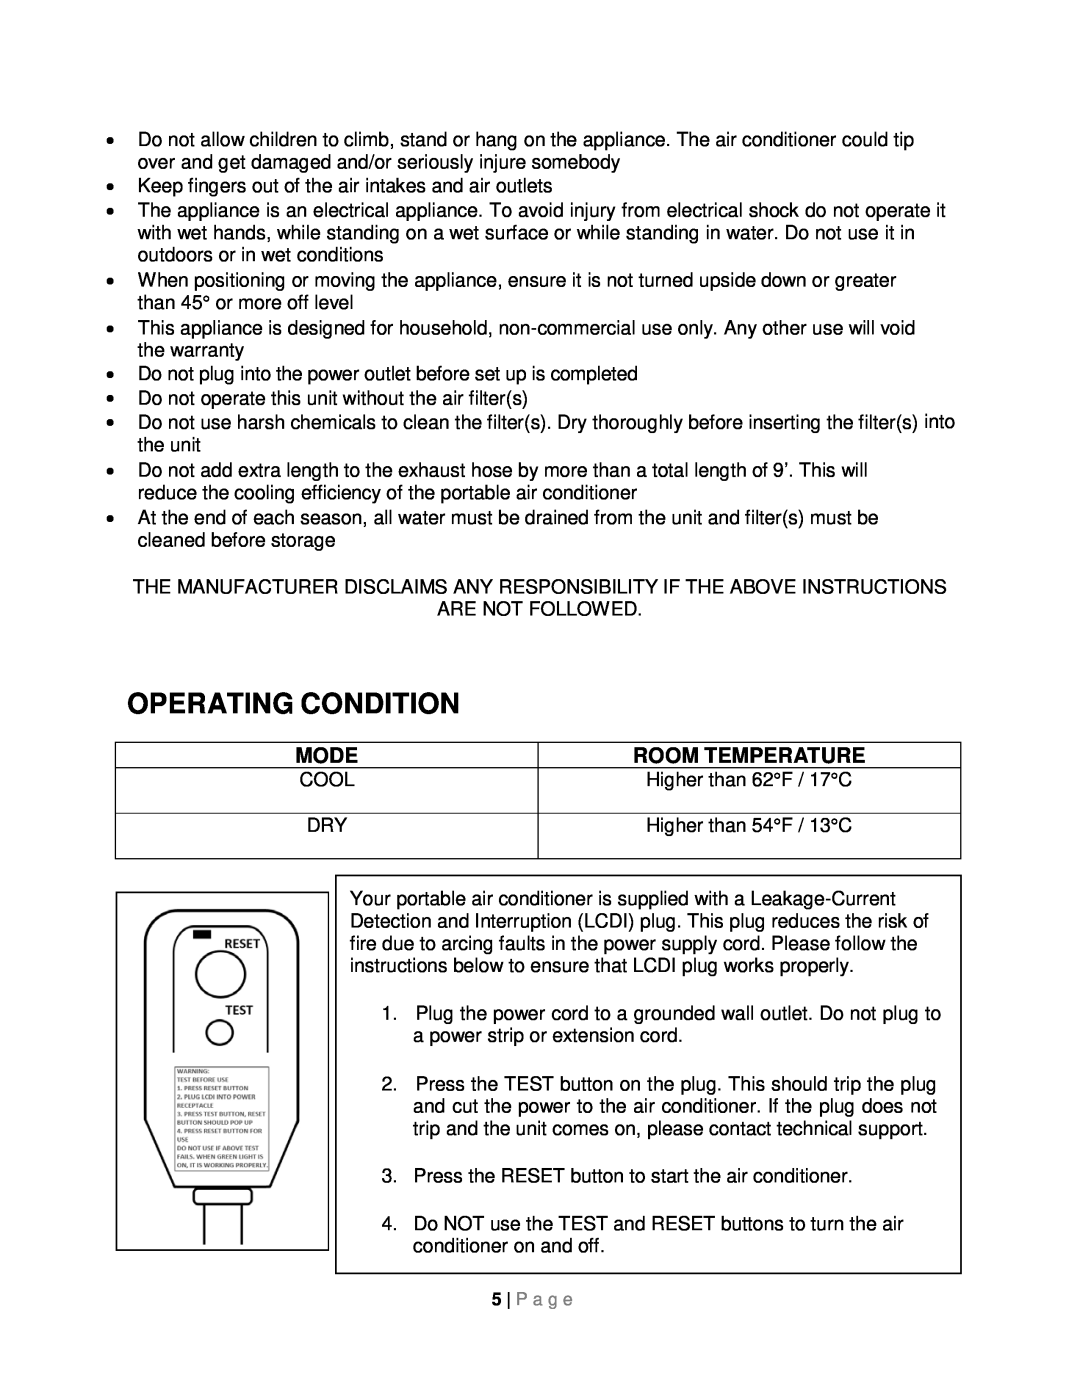 Whynter ARC-08WB instruction manual Operating Condition, Mode, Room Temperature 